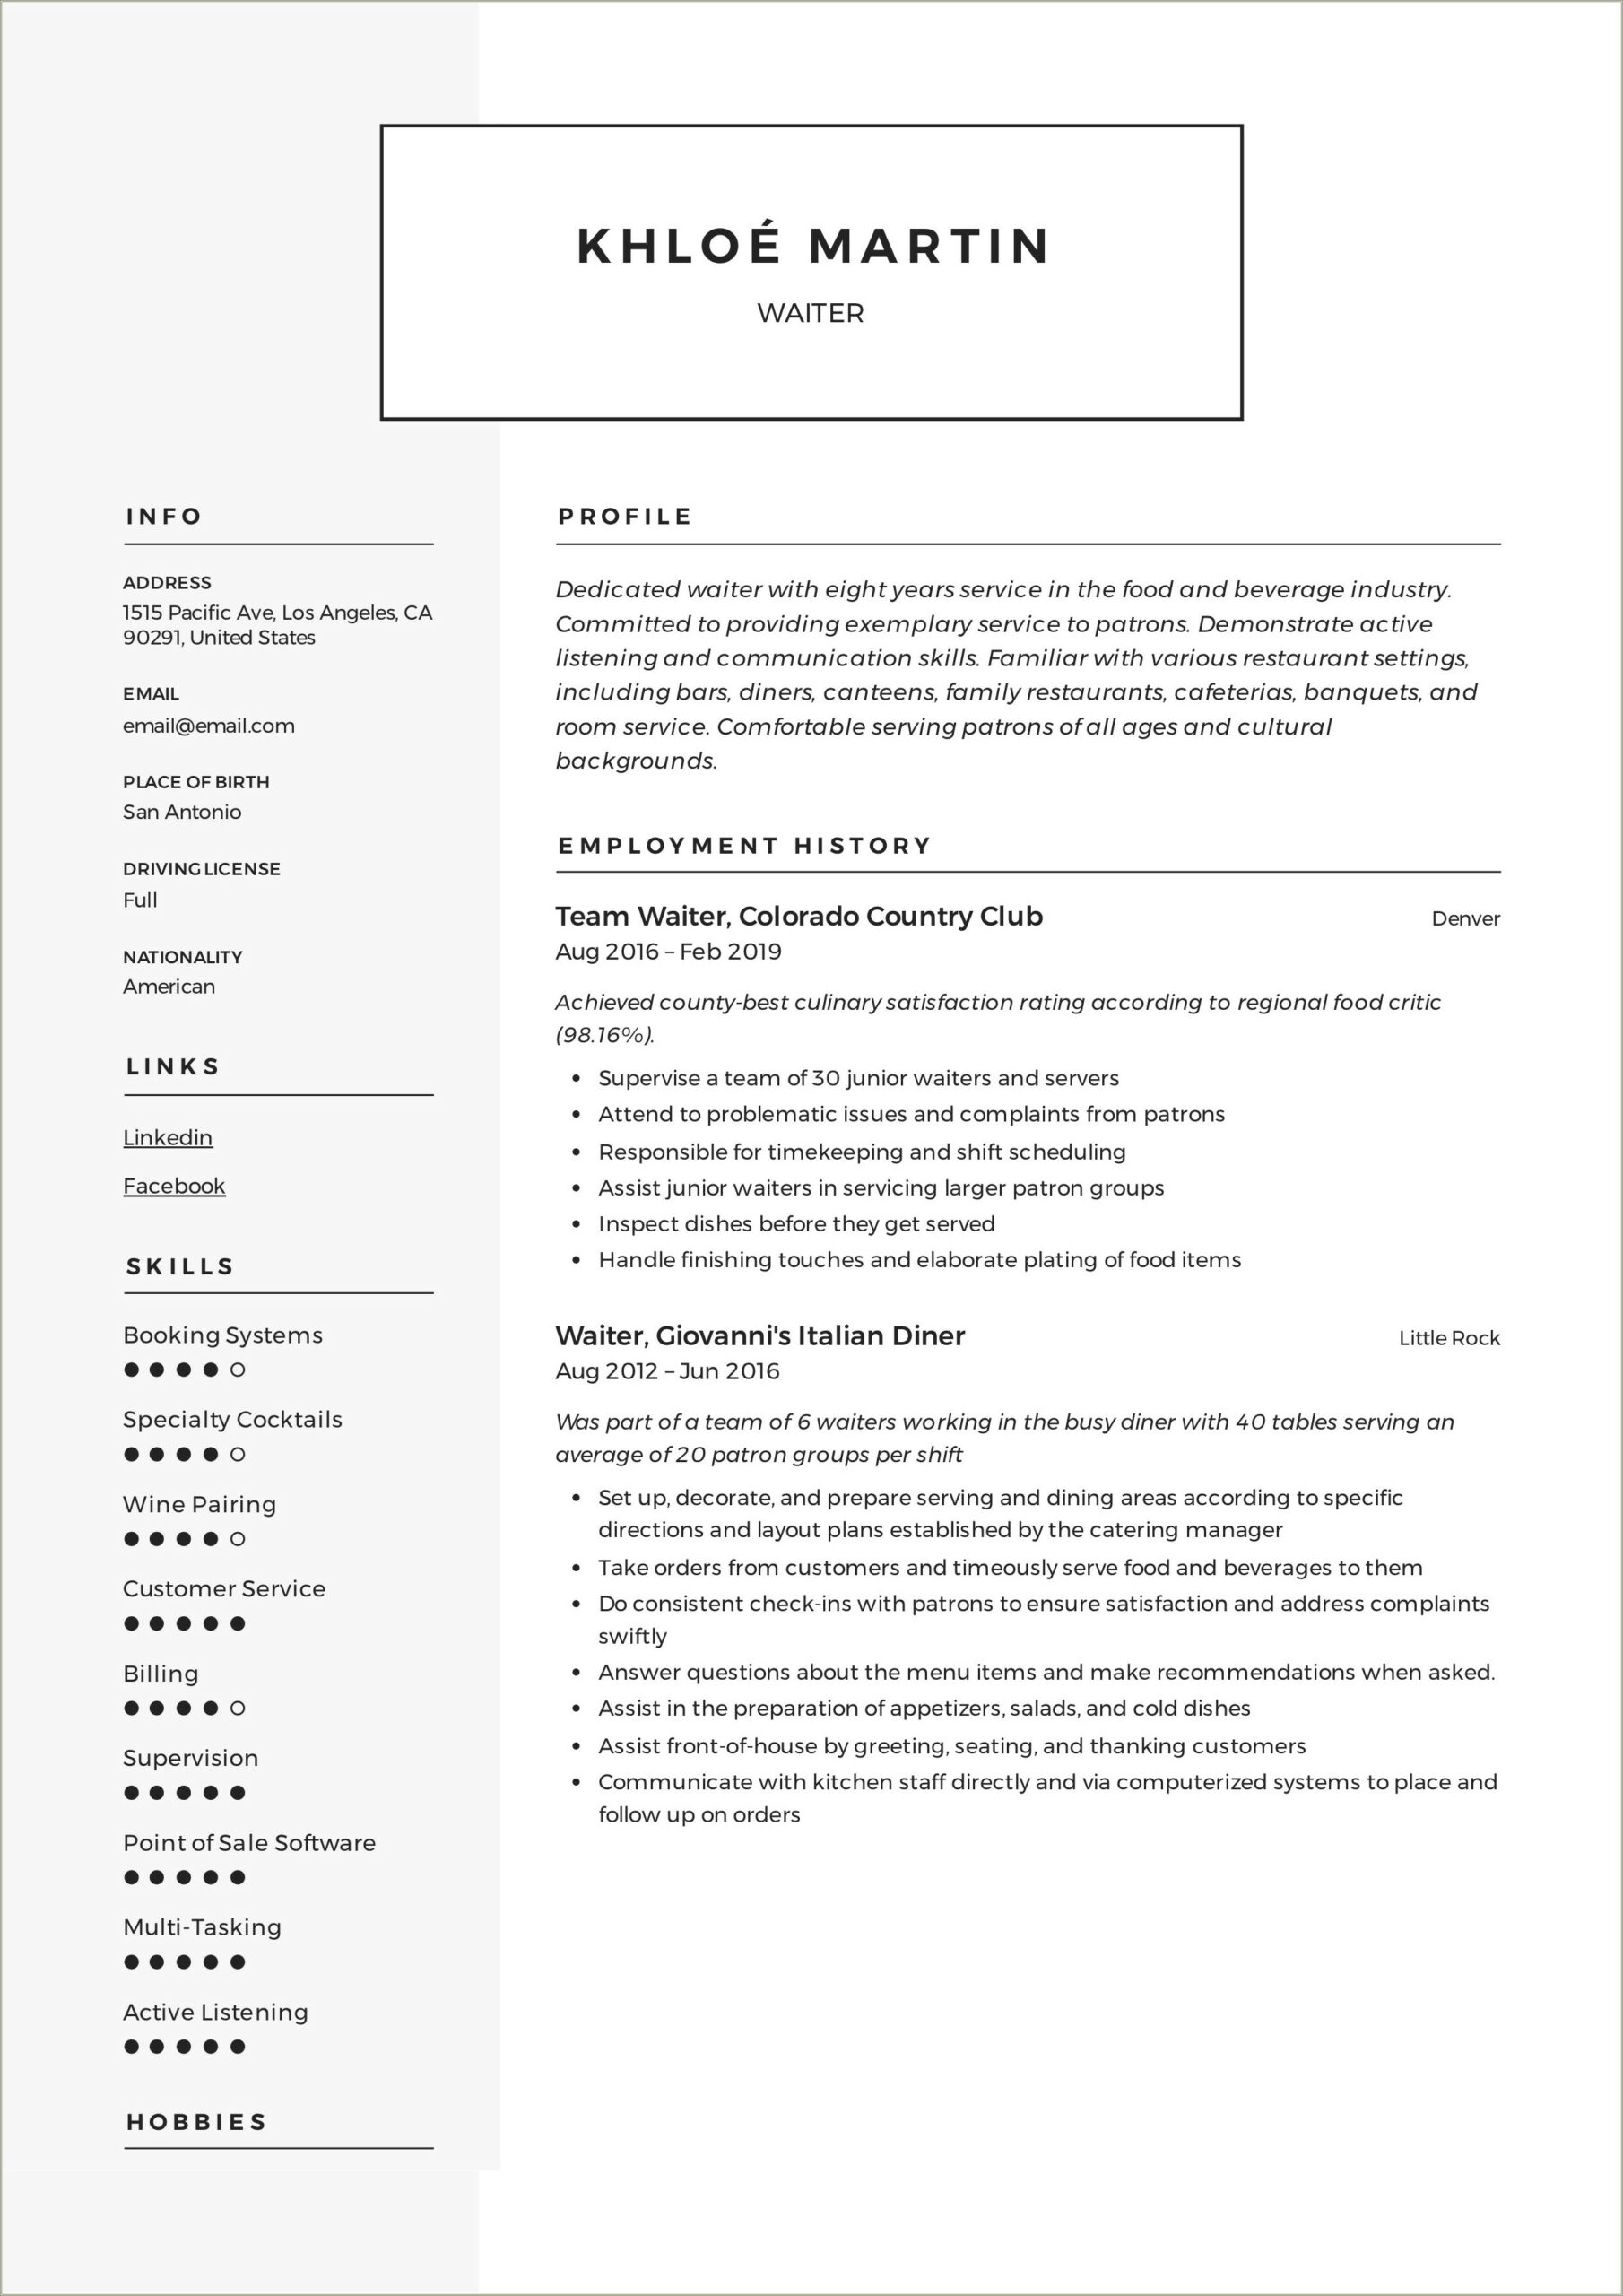 Listen And Communicate Example On Resume